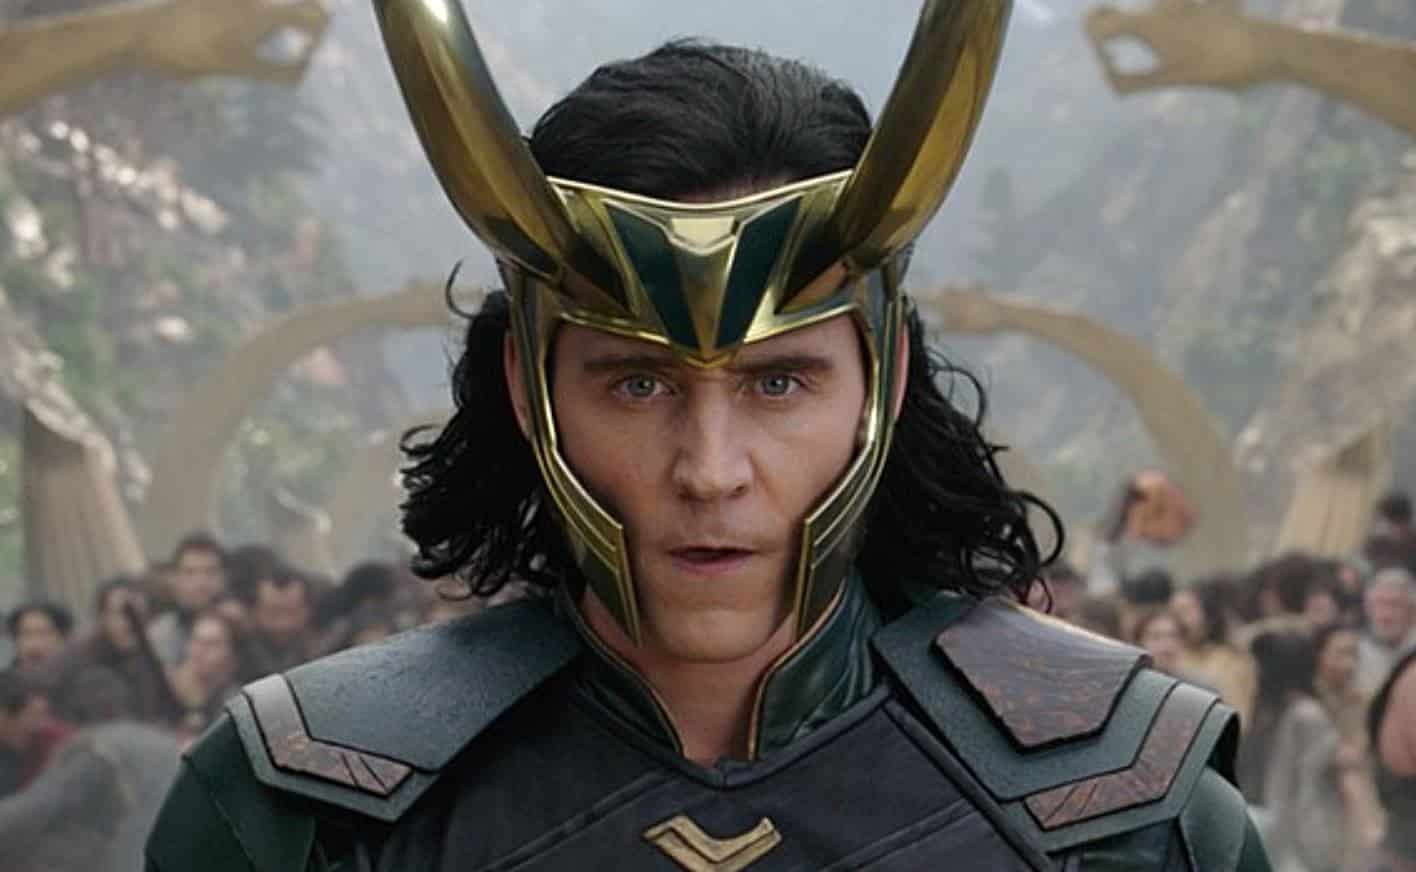 Blue Hair in Infinity War: The Symbolism of Loki's Hair Color Change - wide 7